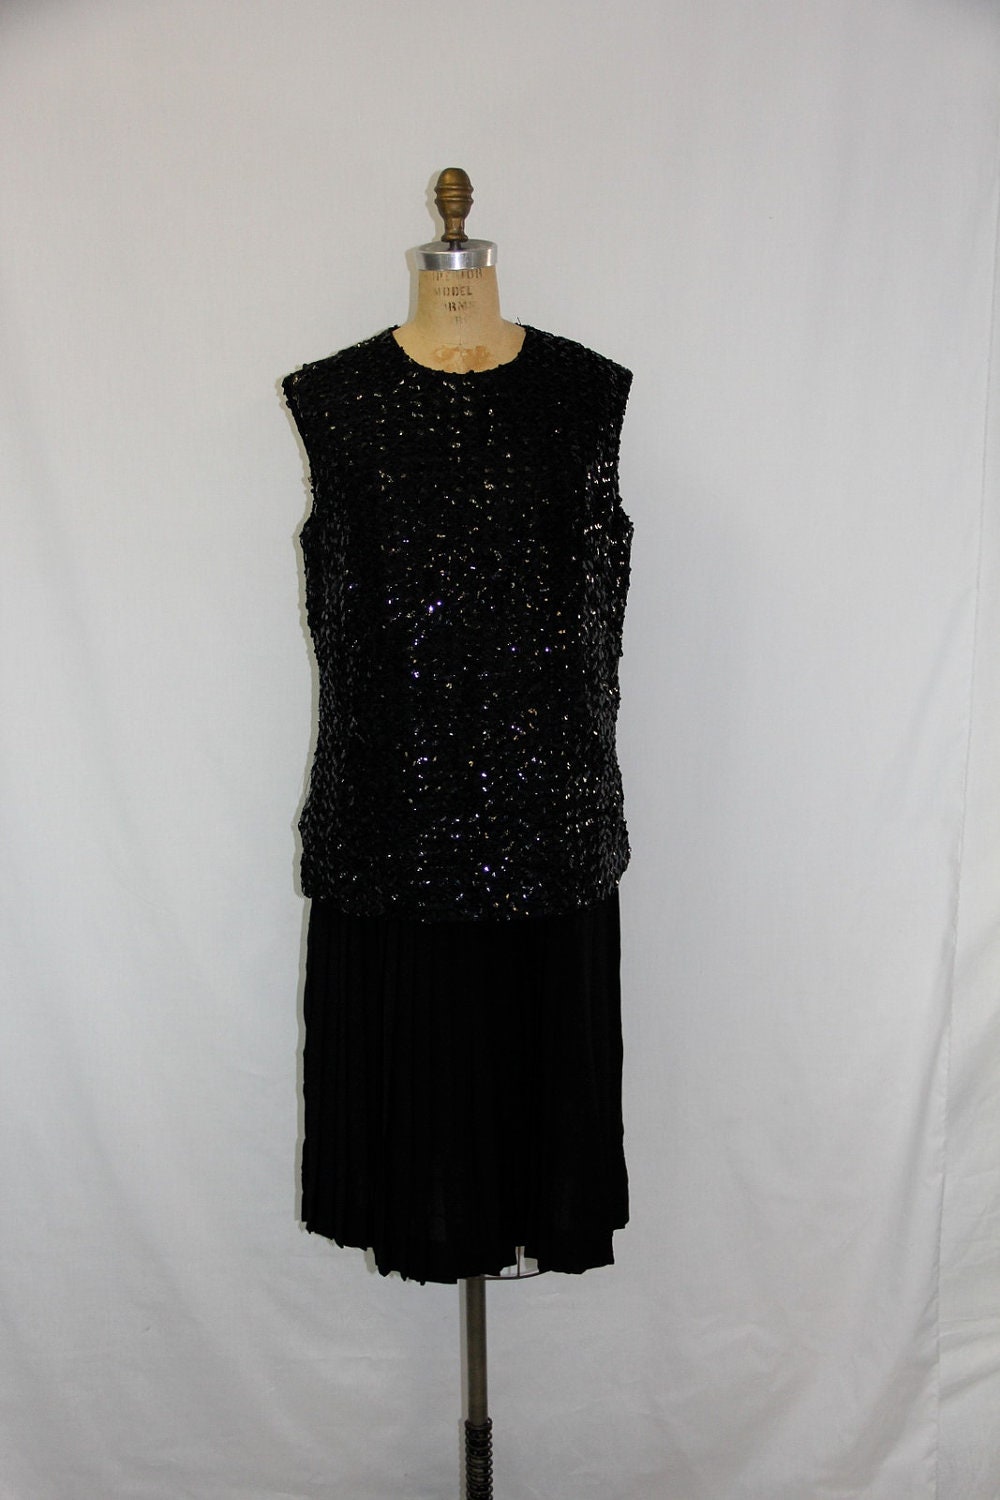 XL Vintage Dress 1960s Sequin Cocktail Party - Great Gatsby Style